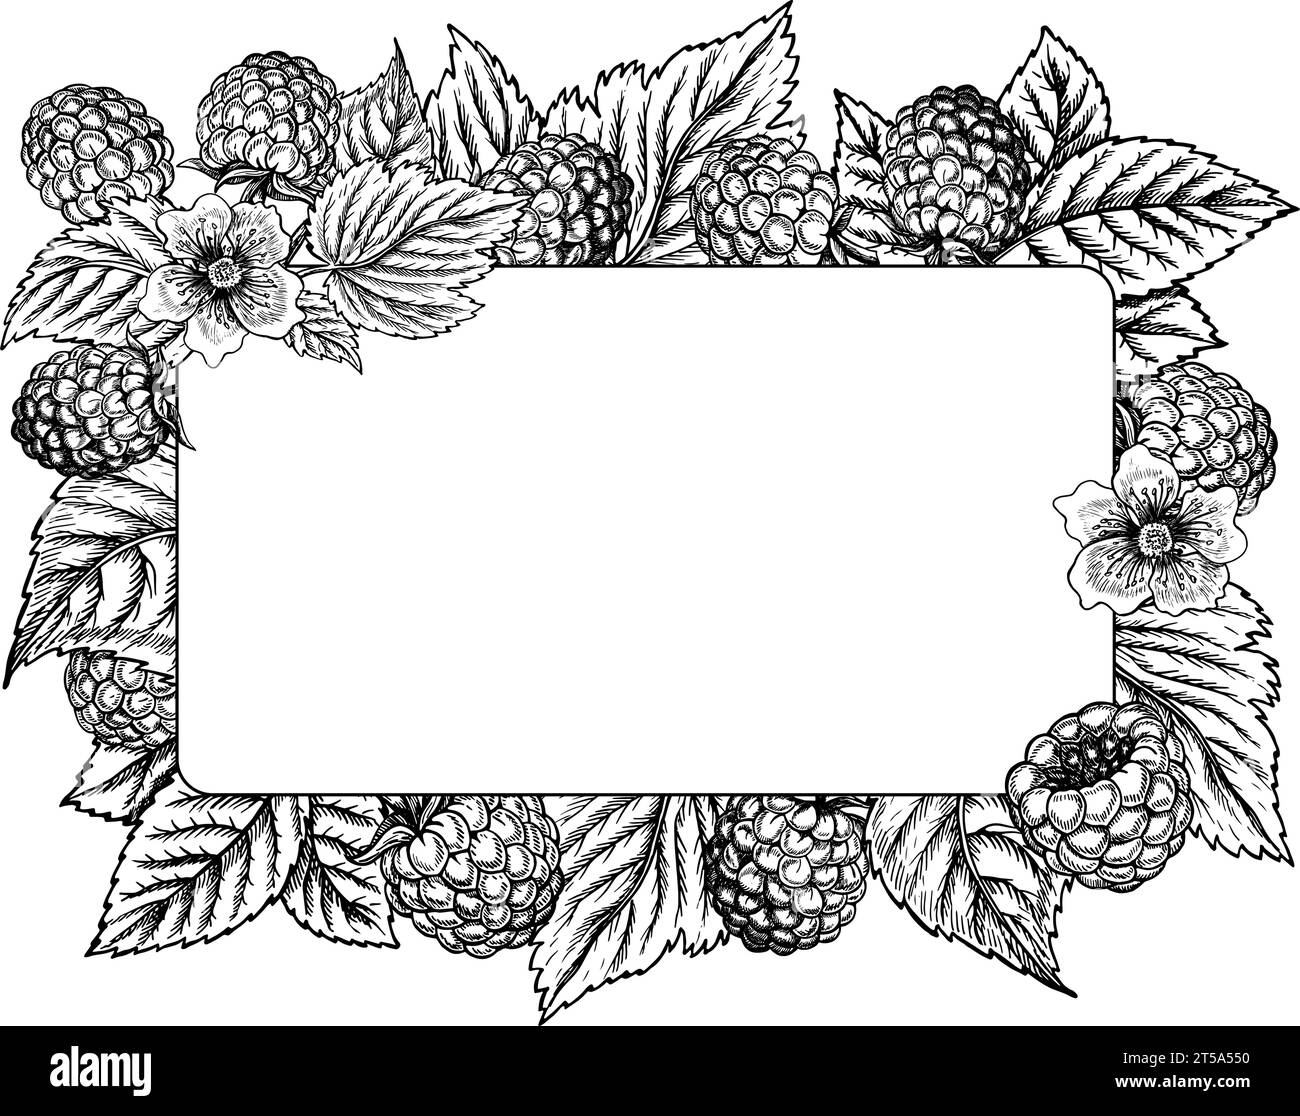 Frame with raspberries, hand drawn black and white graphic vector illustration. Isolated on a white background. For packaging, labels and printed prod Stock Vector